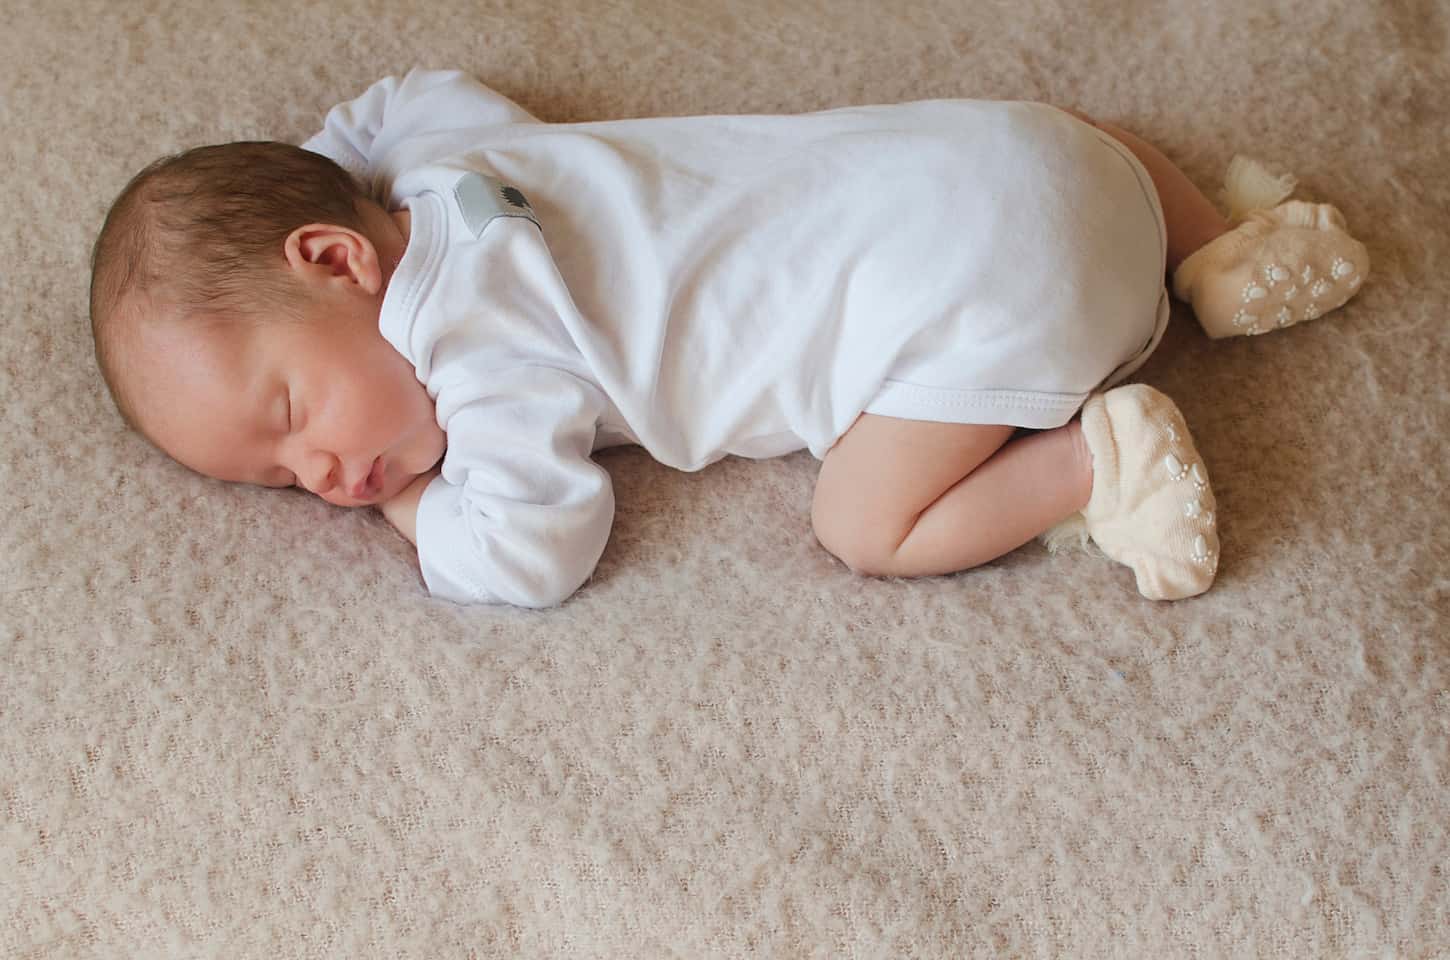 An image of a newborn sleeping sweetly on his tummy in full-length white clothes.